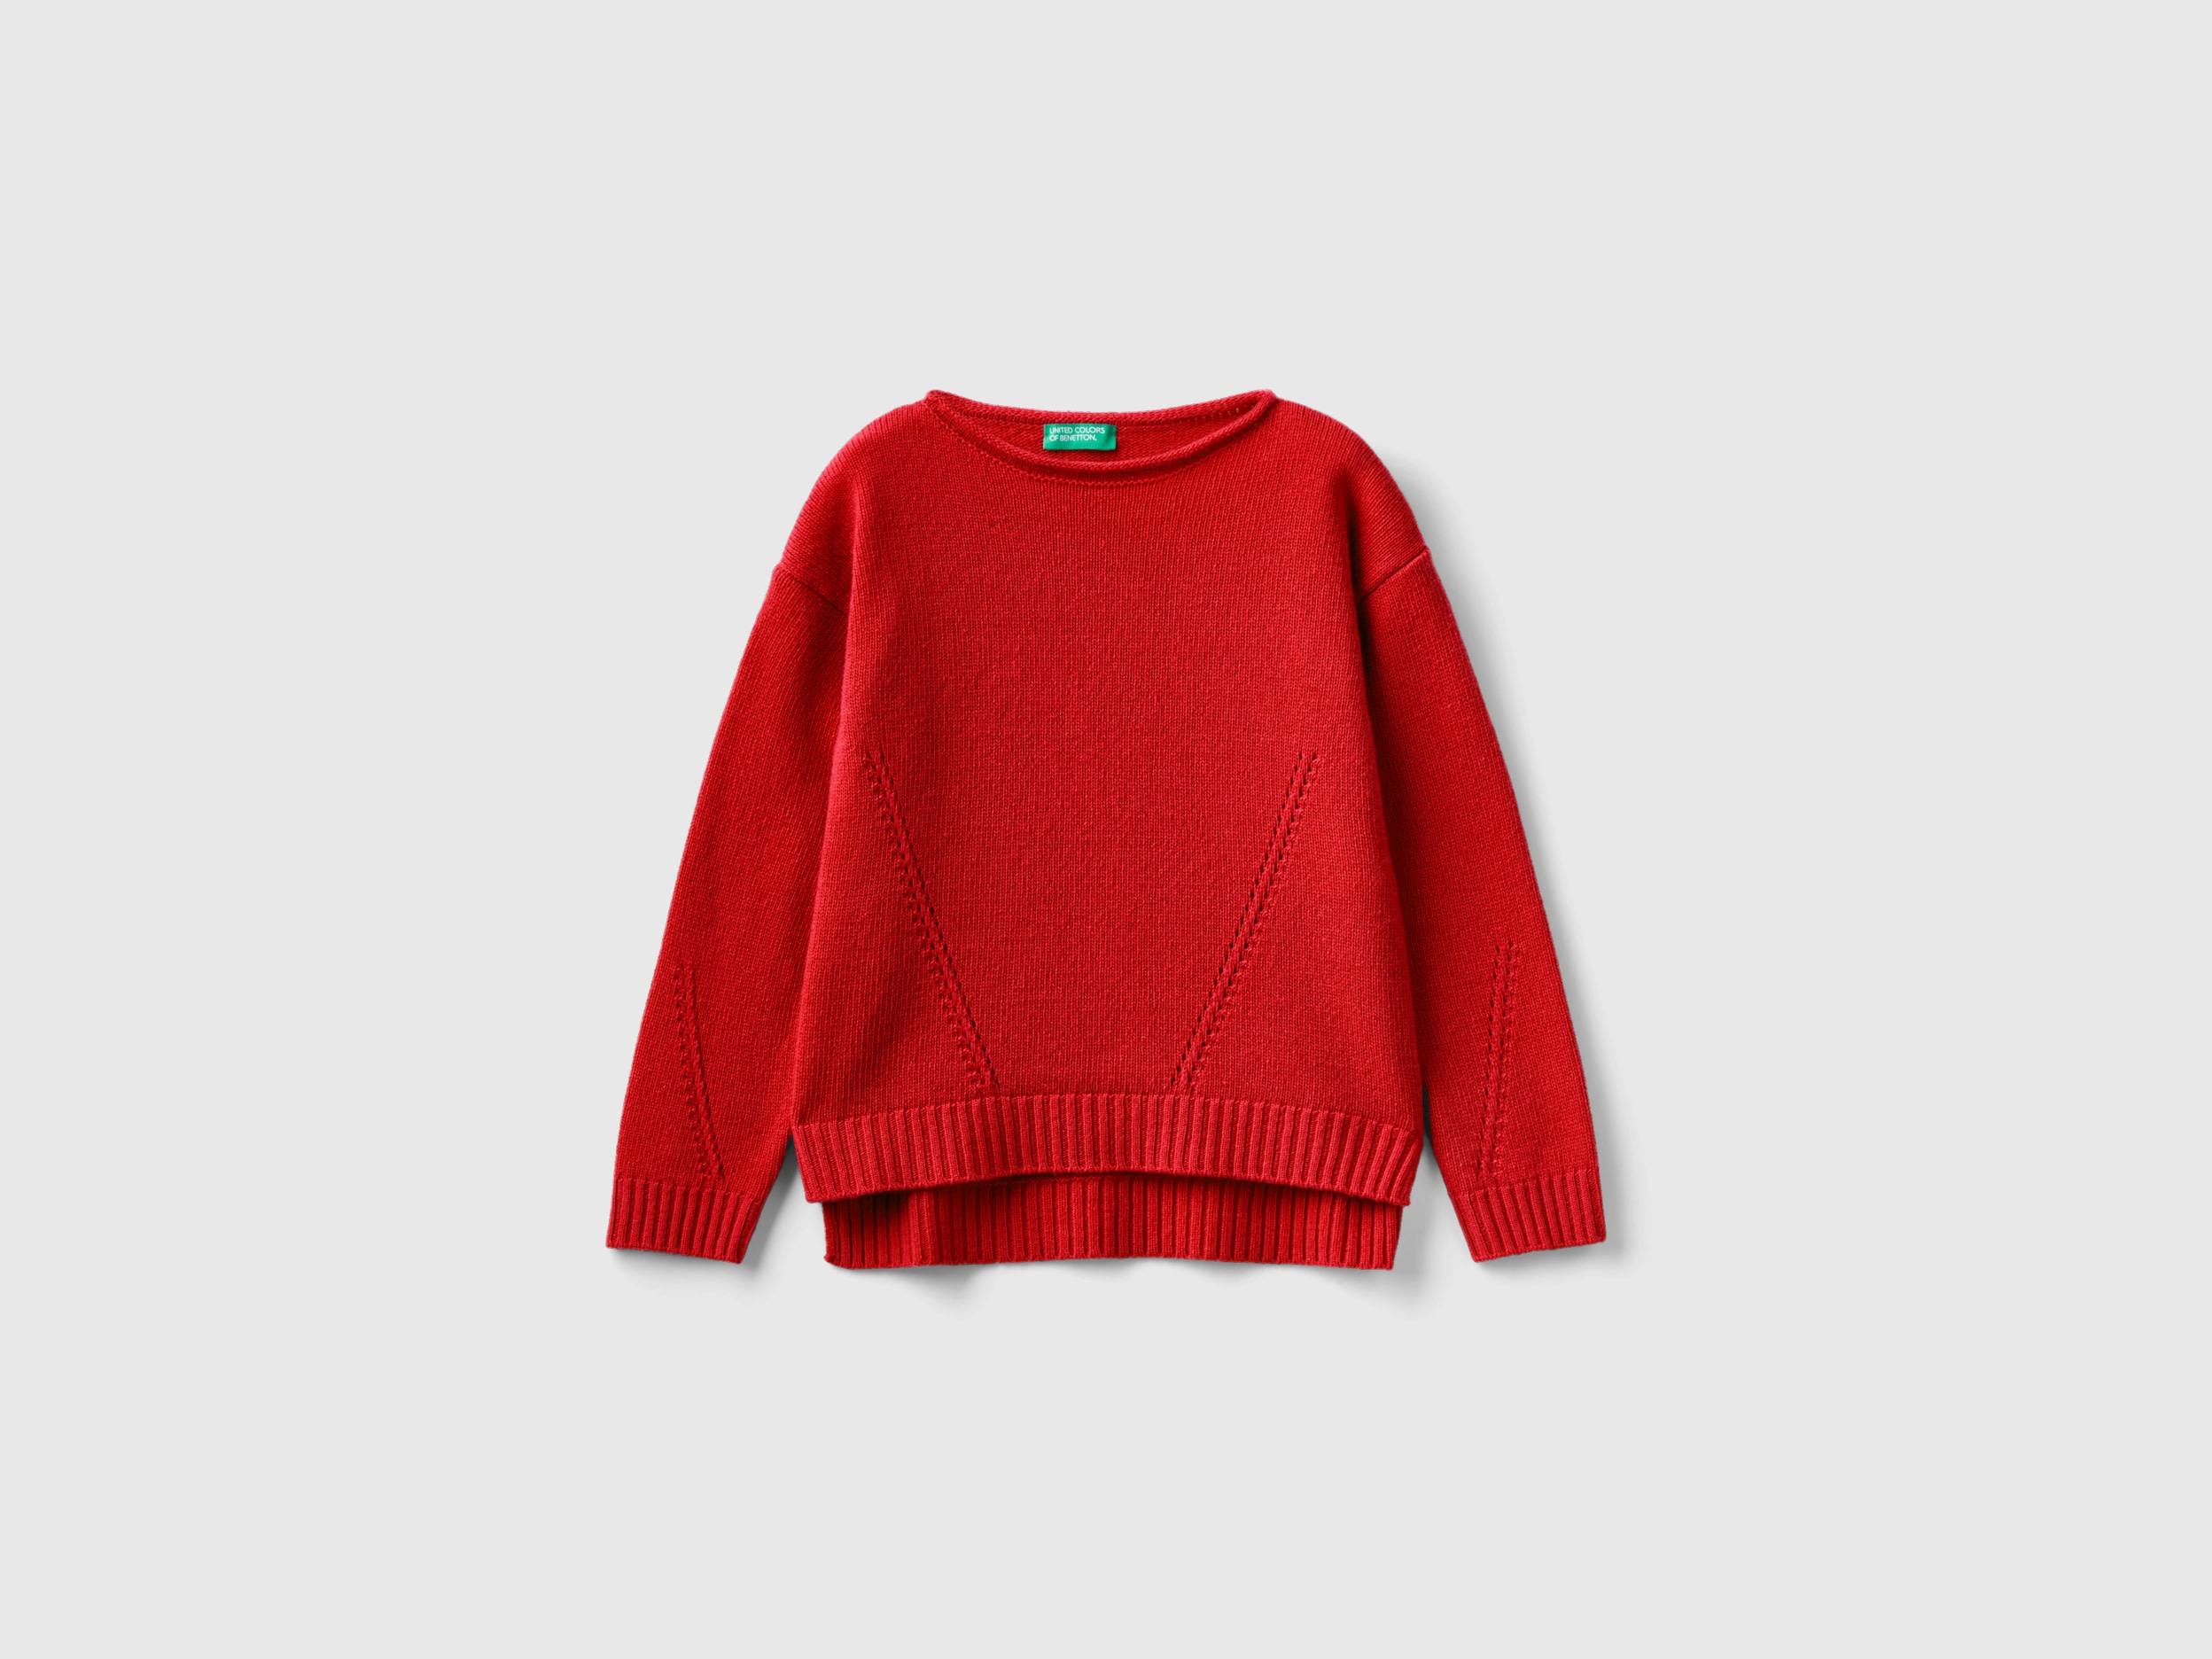 Benetton, Knit Sweater With Playful Stitching, size M, Red, Kids